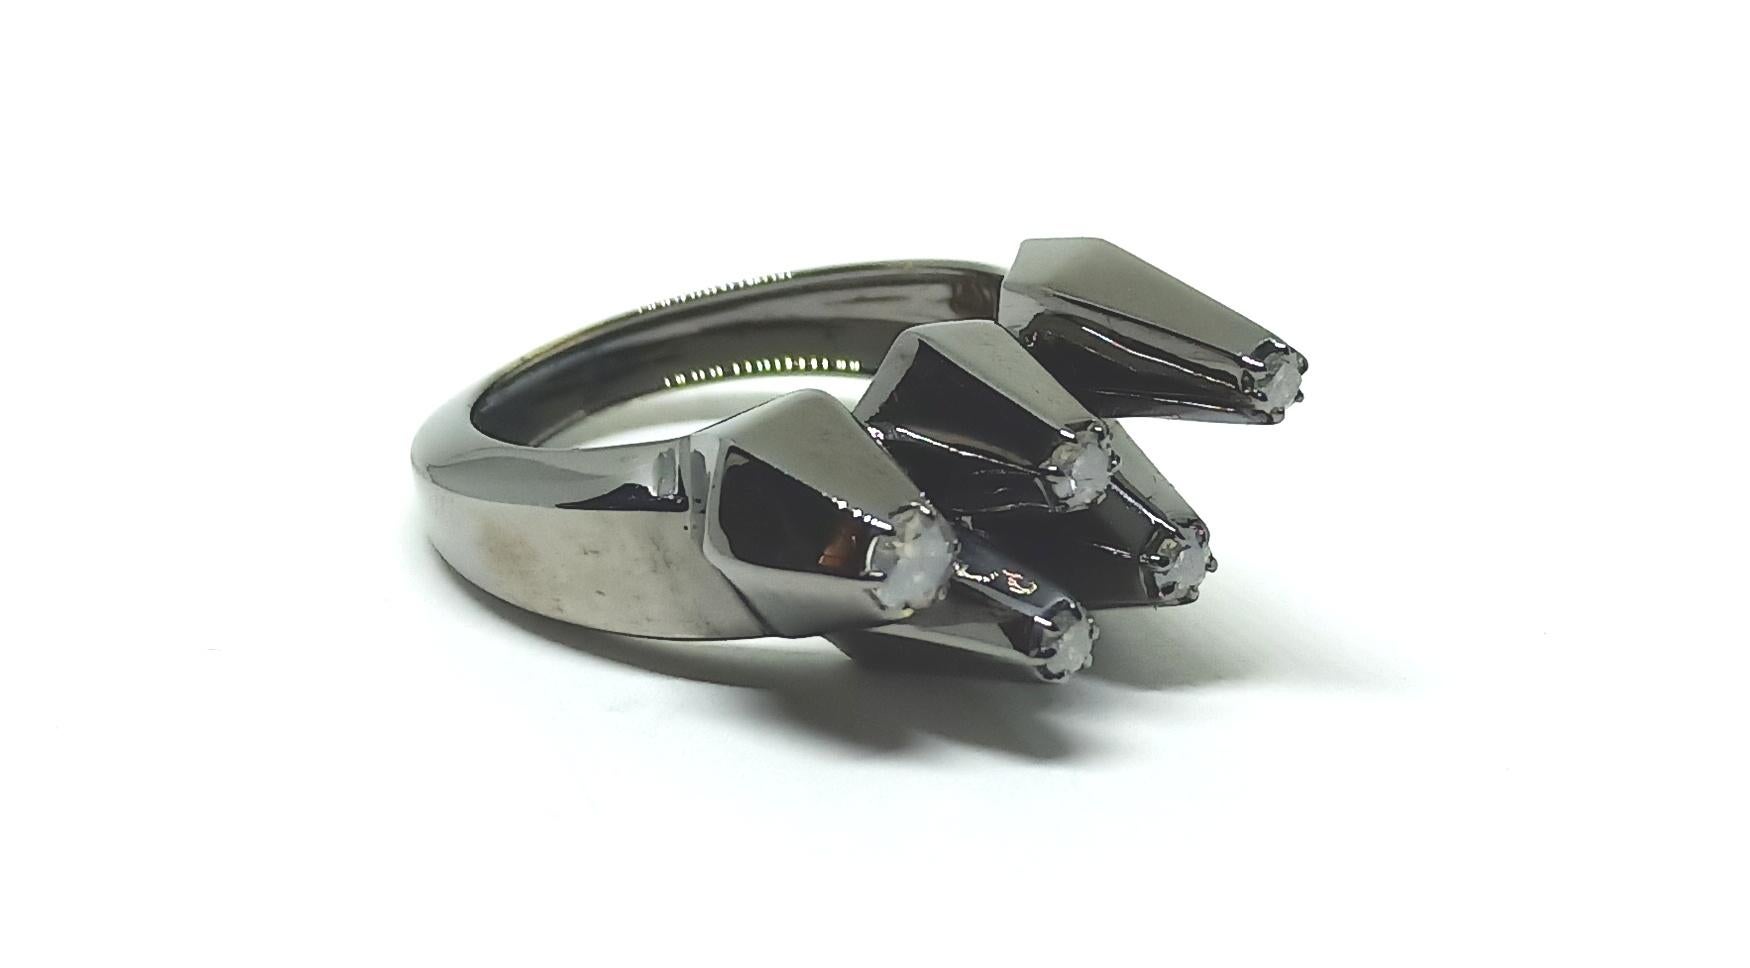 Stock out of Ordinary. Break the Mold.
Settle for Nothing but Exceptional One-of-a-Kind Ring.

“Joy, happiness, inspiration... are the choices you make in your life. When you choose to see beauty in every creation, by drowning the murmurs of the